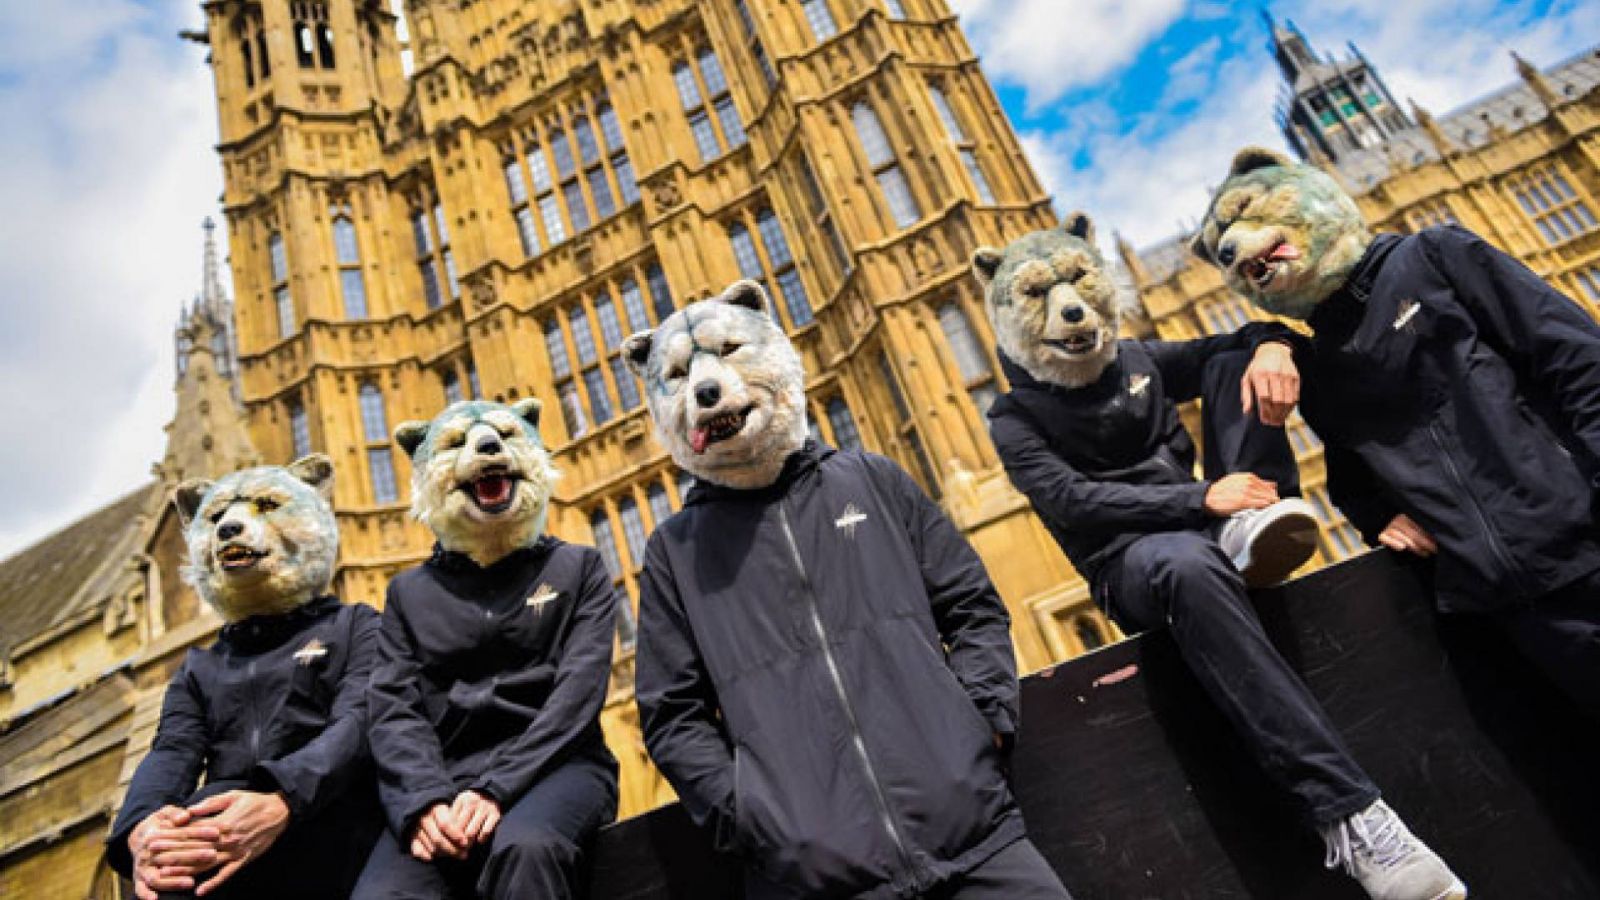 Le dernier album de MAN WITH A MISSION disponible dans 25 pays © MAN WITH A MISSION. All rights reserved.